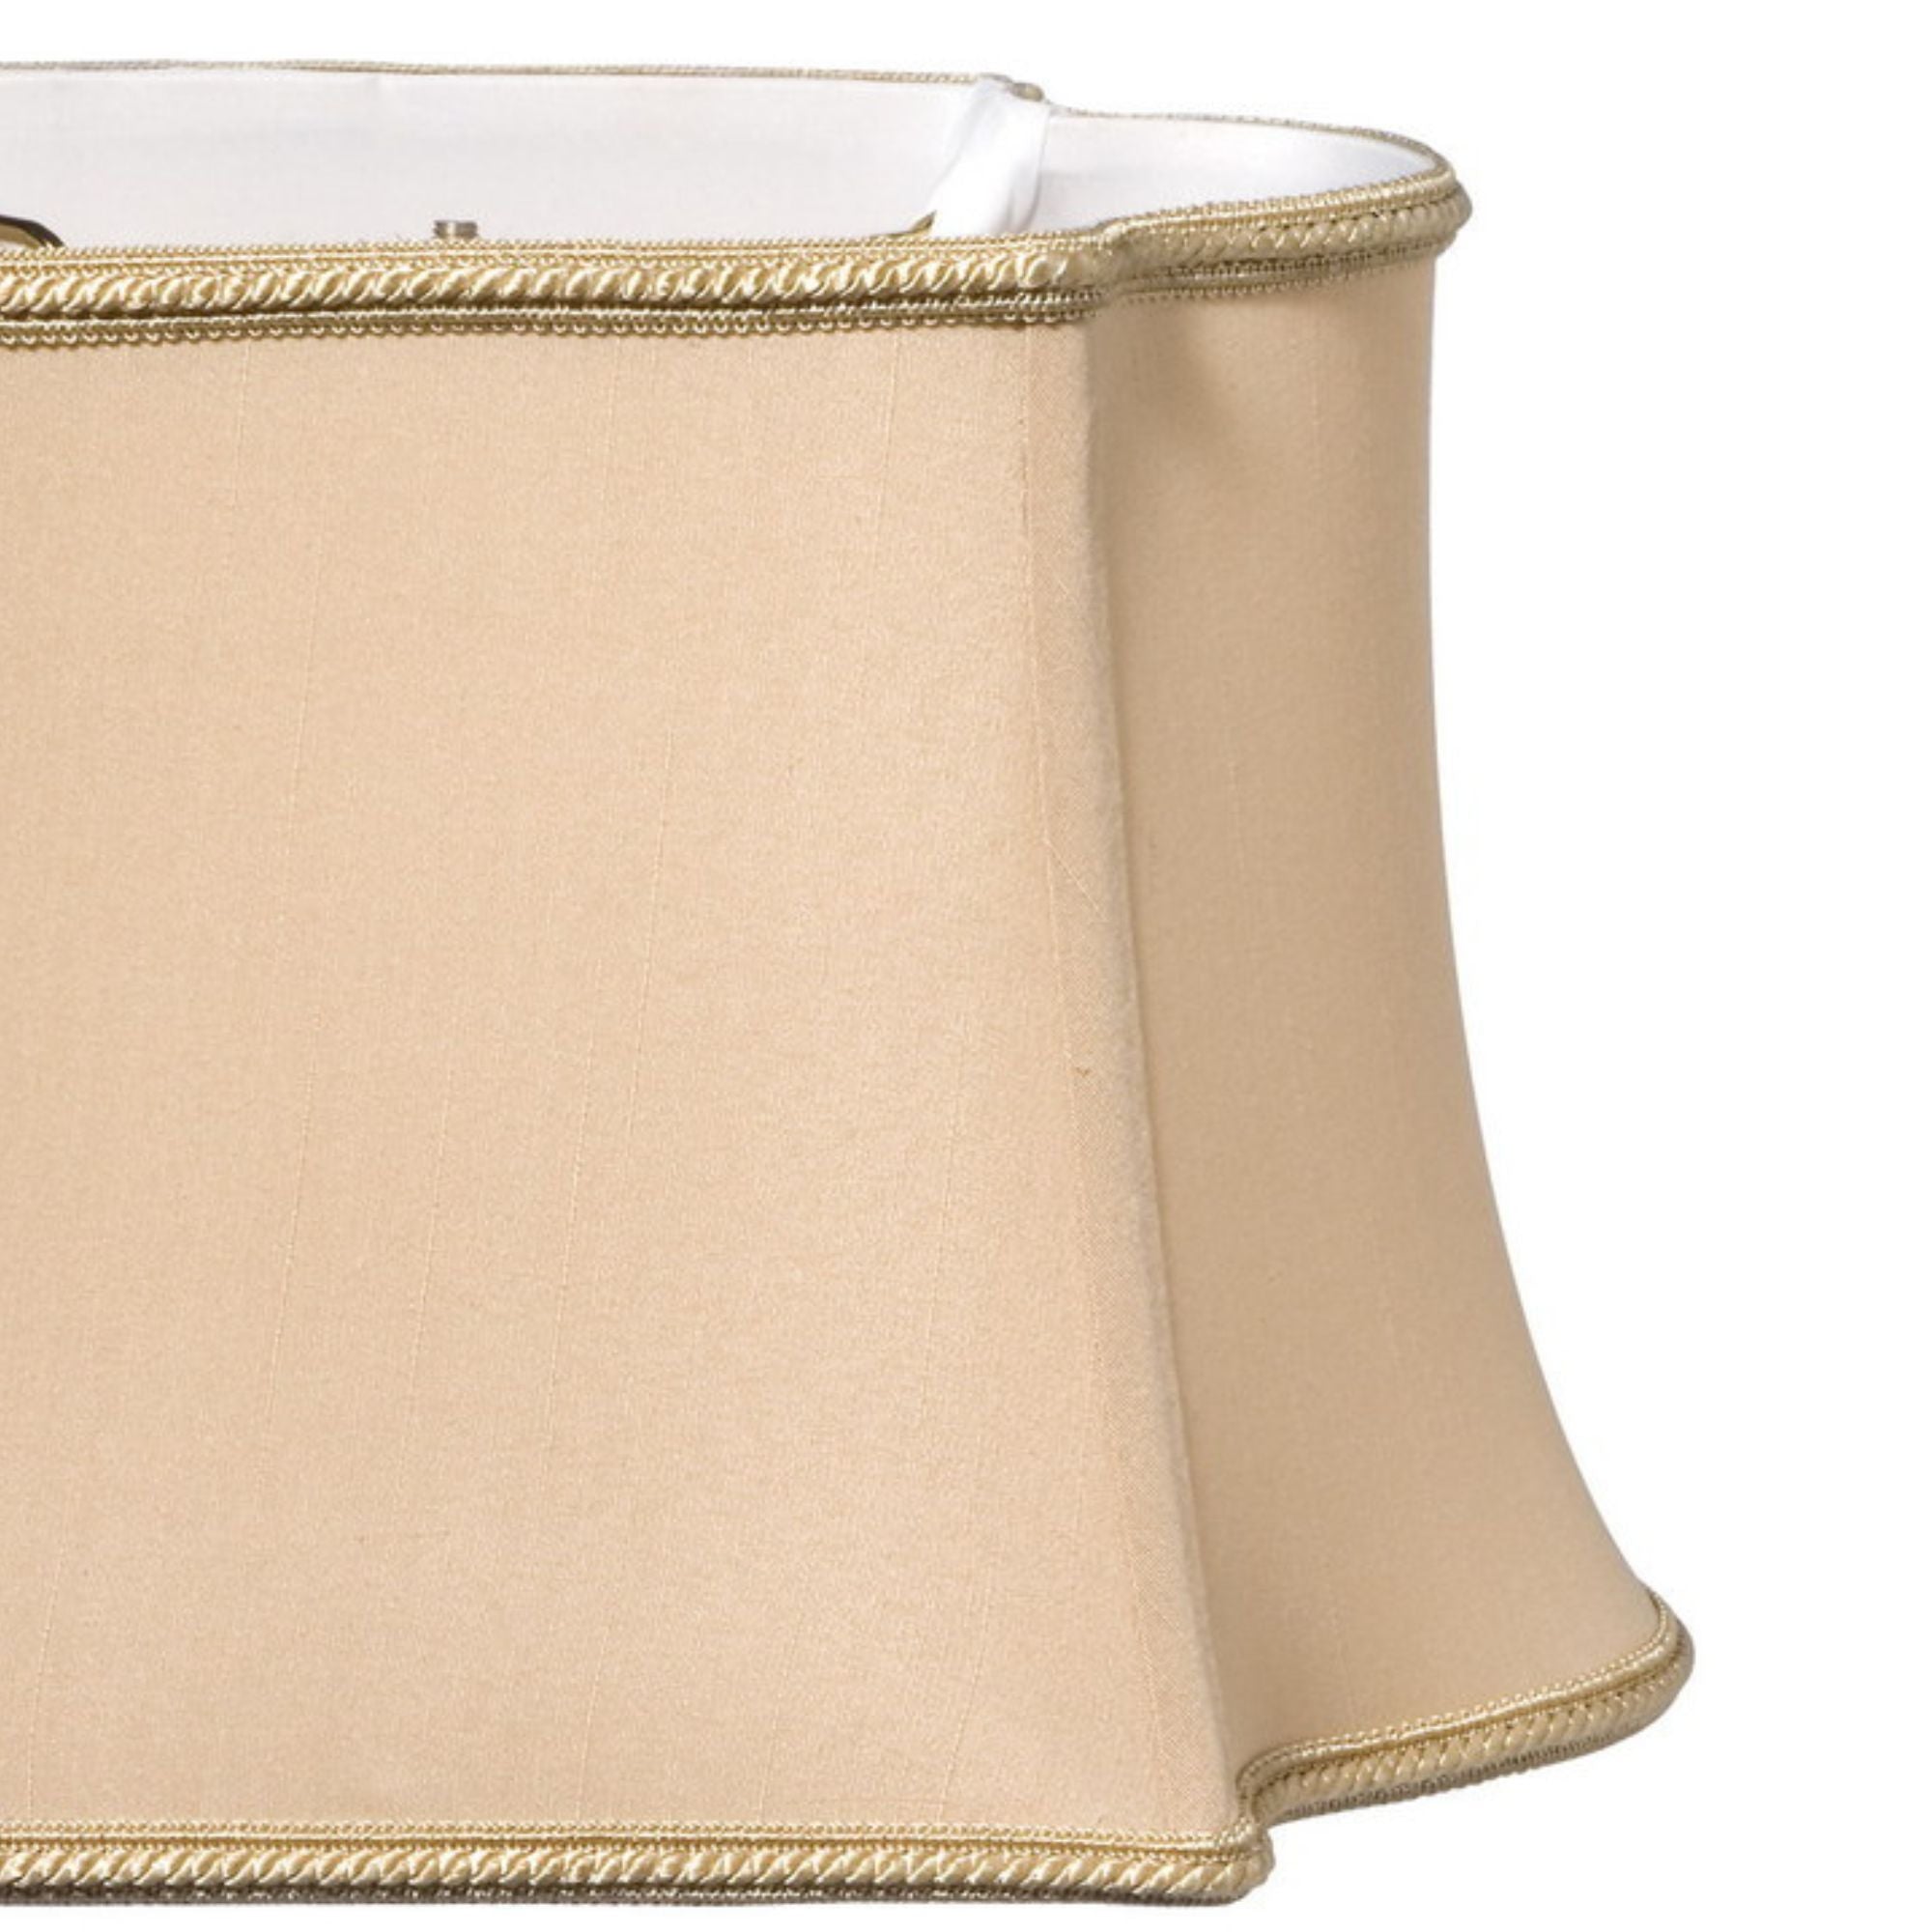 Fancy Oblong Softback Lampshade with Washer Fitter gold-shantung